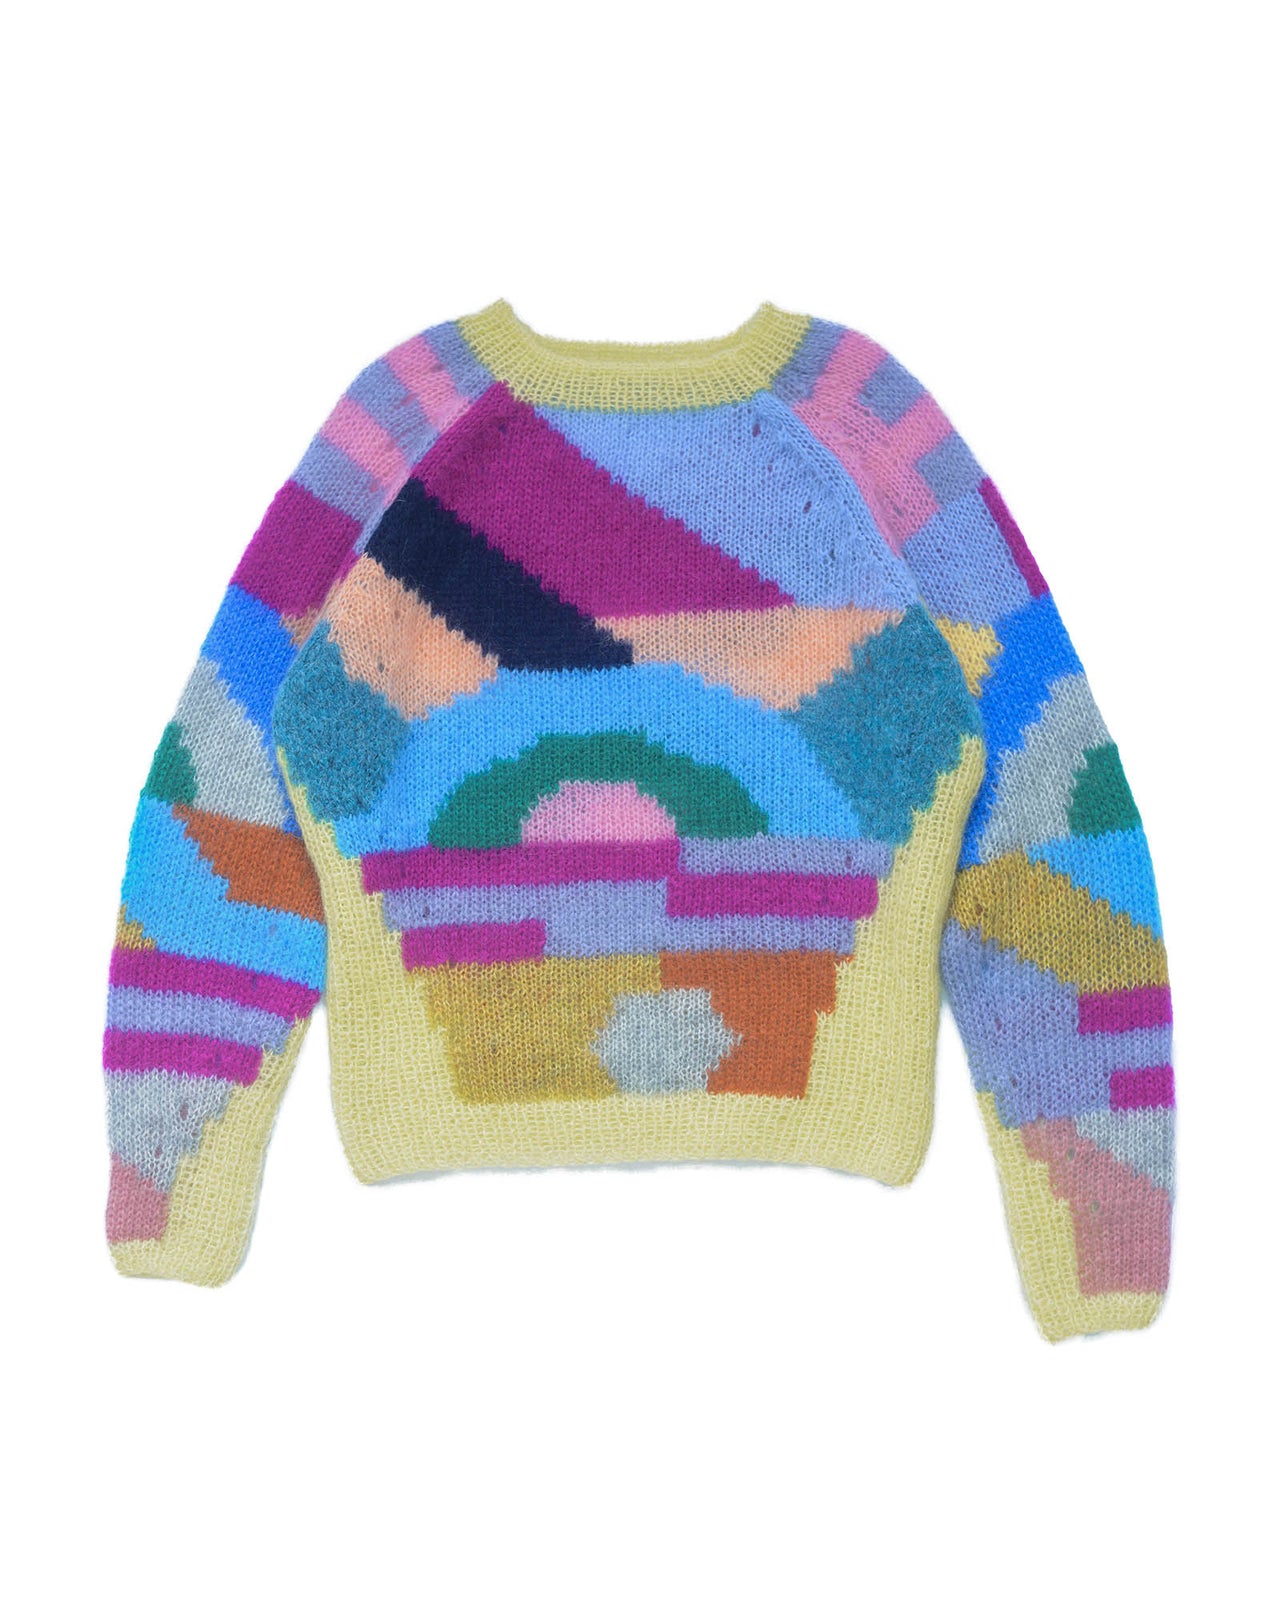 Mohair sweater laid flat on white background. The sweater is yellow and is covered with colourful abstract colour block patterns on most of its surface.